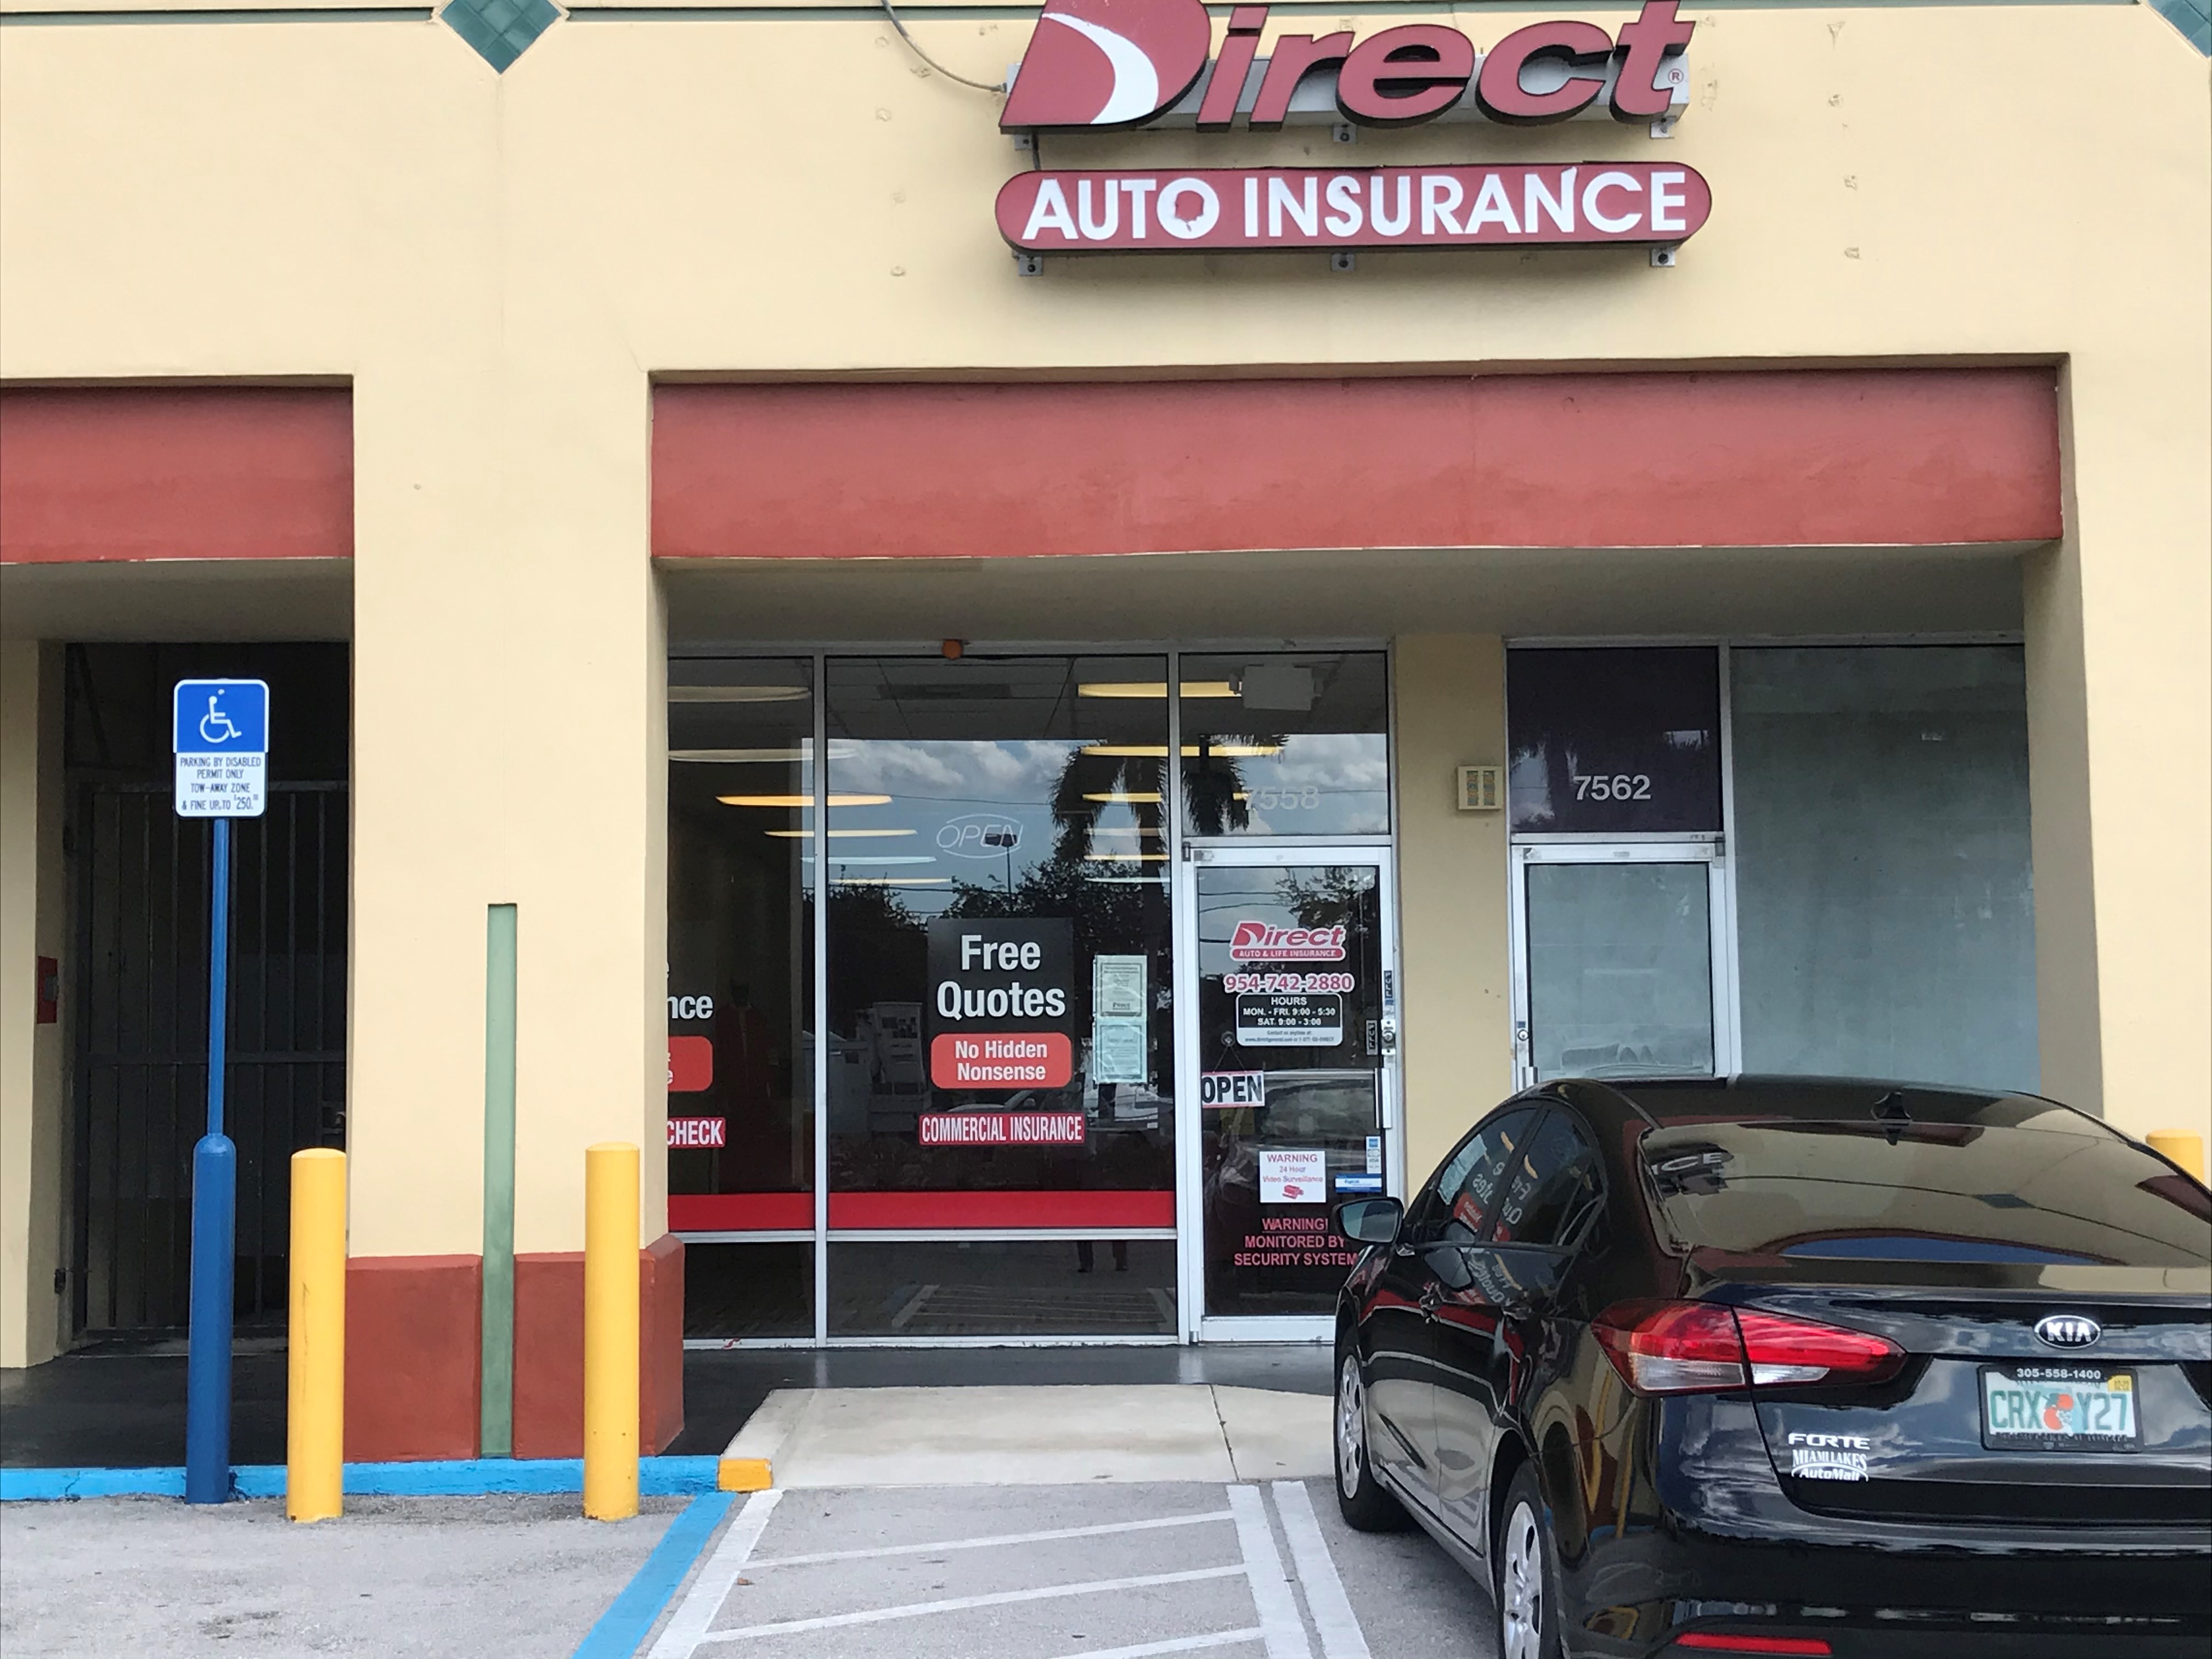 Direct Auto Insurance storefront located at  7558 West Commercial Boulevard, Lauderhill